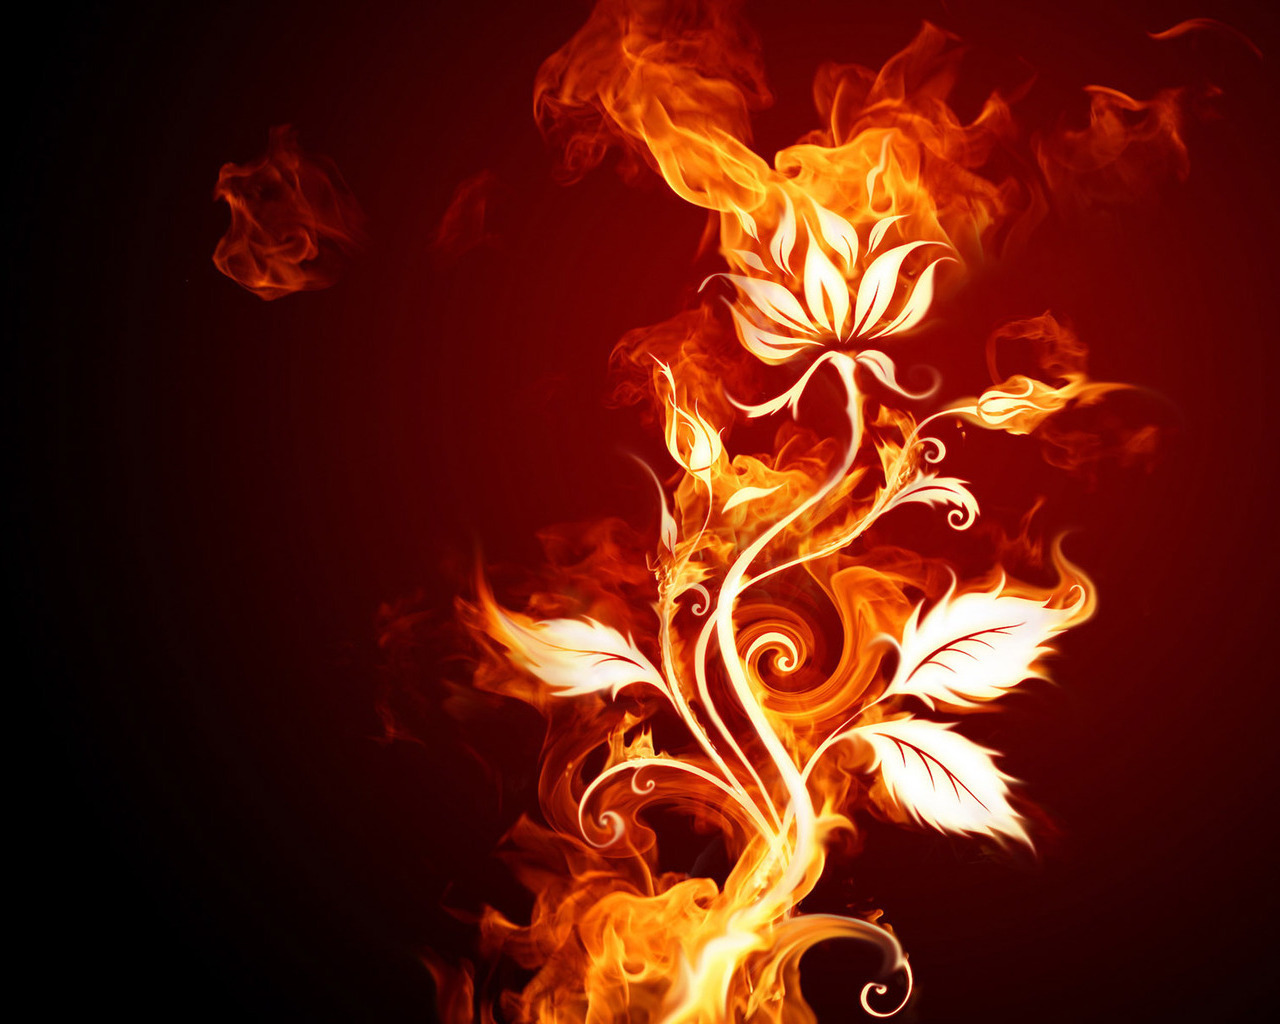 fire, flowers, plants, red High Definition image